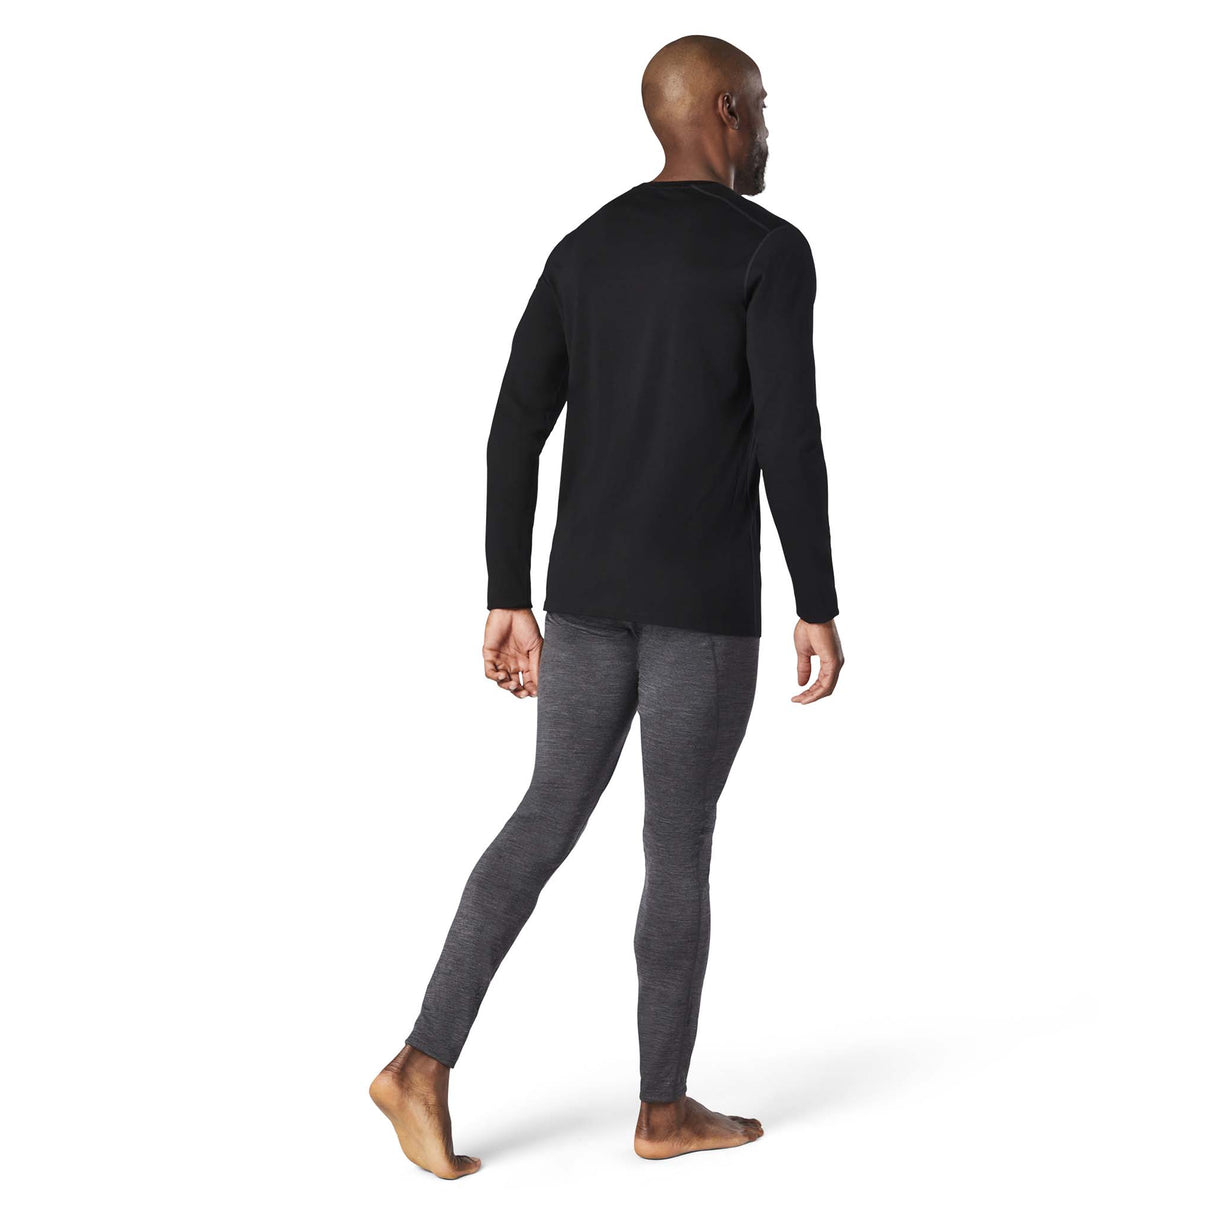 Smartwool Merino 150 Baselayer chandail col rond noir homme dos